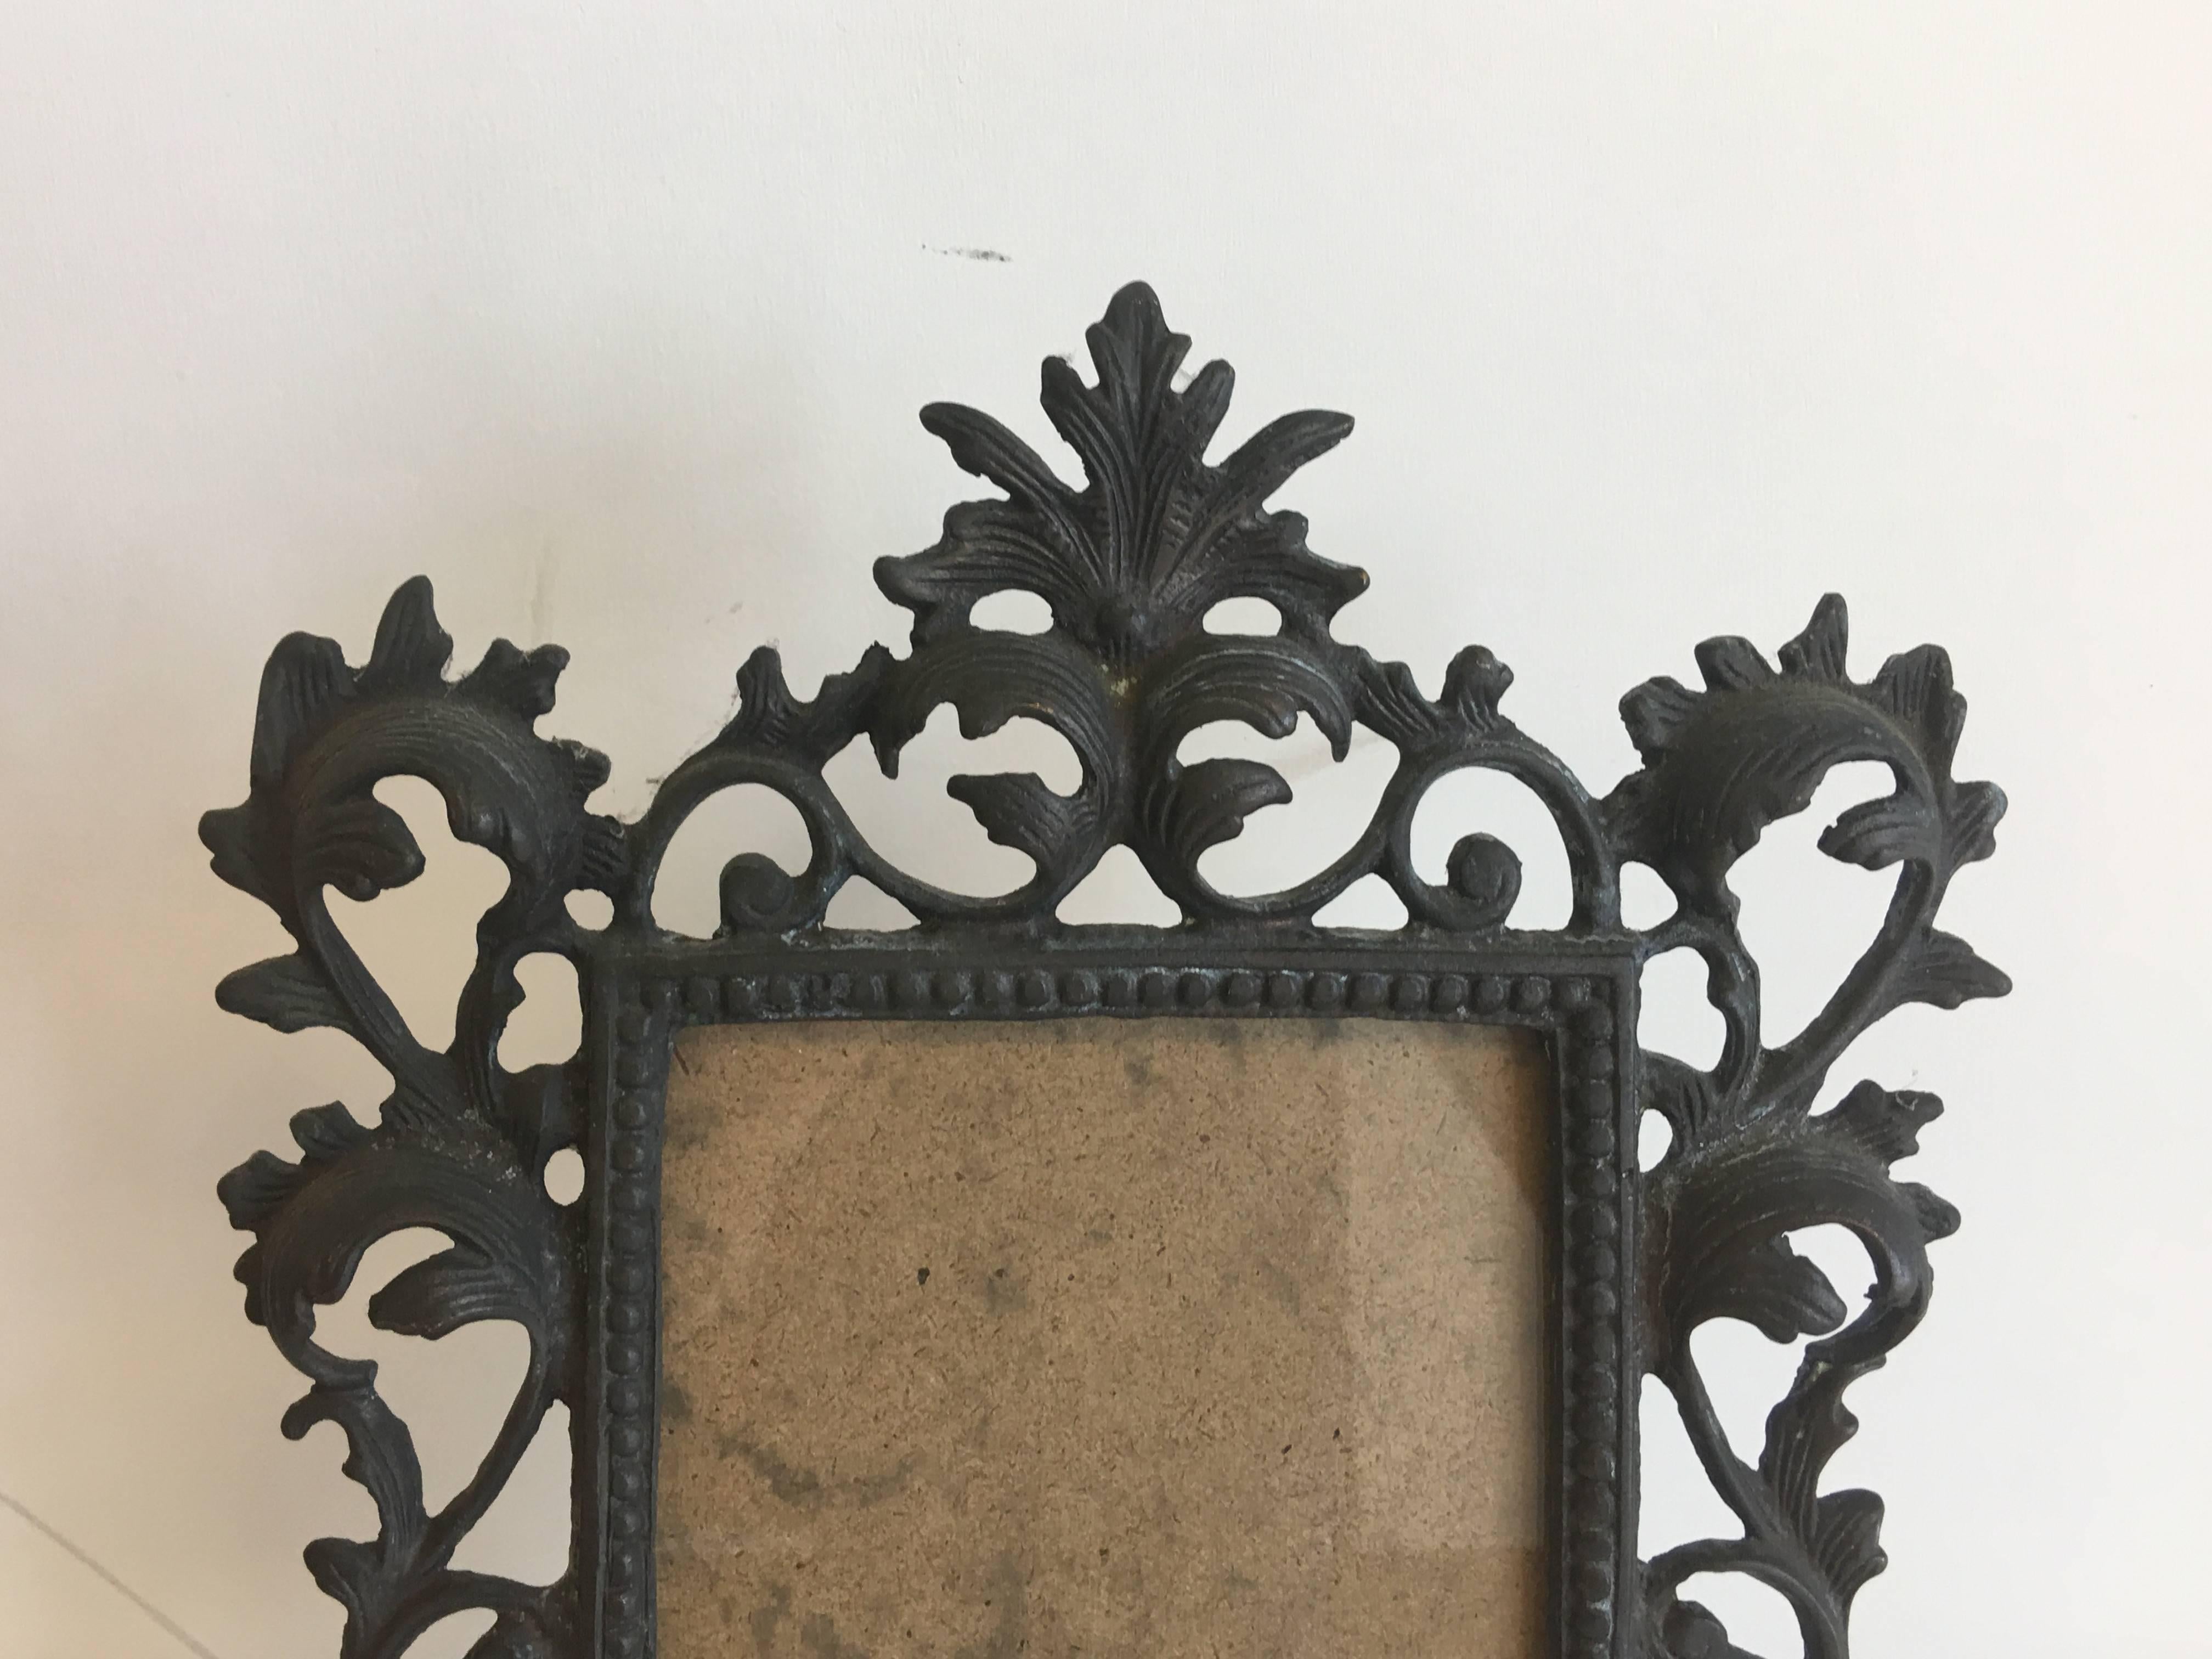 Offered is a fabulous, 19th century Art Nouveau, Louis XV style bronze standing picture frame with heavy detailing. Fits a 5